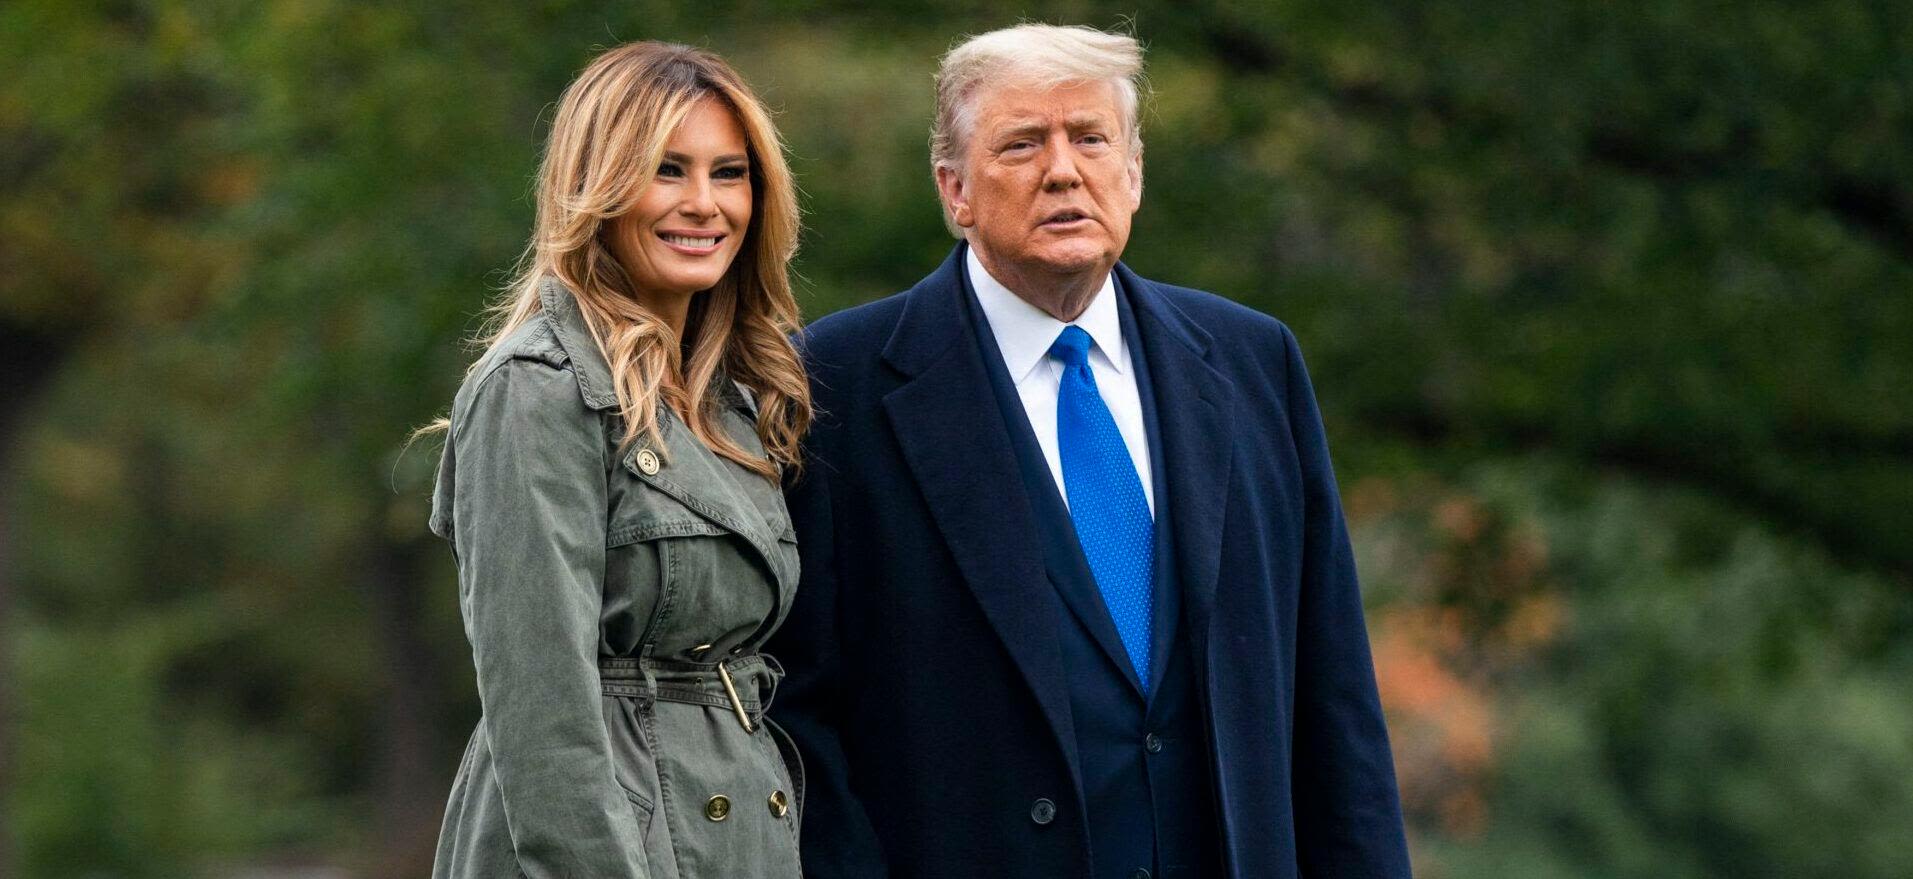 Melania Trump Stuns With A $15K Hermès Bag For First Outing After Husband's Guilty Verdict